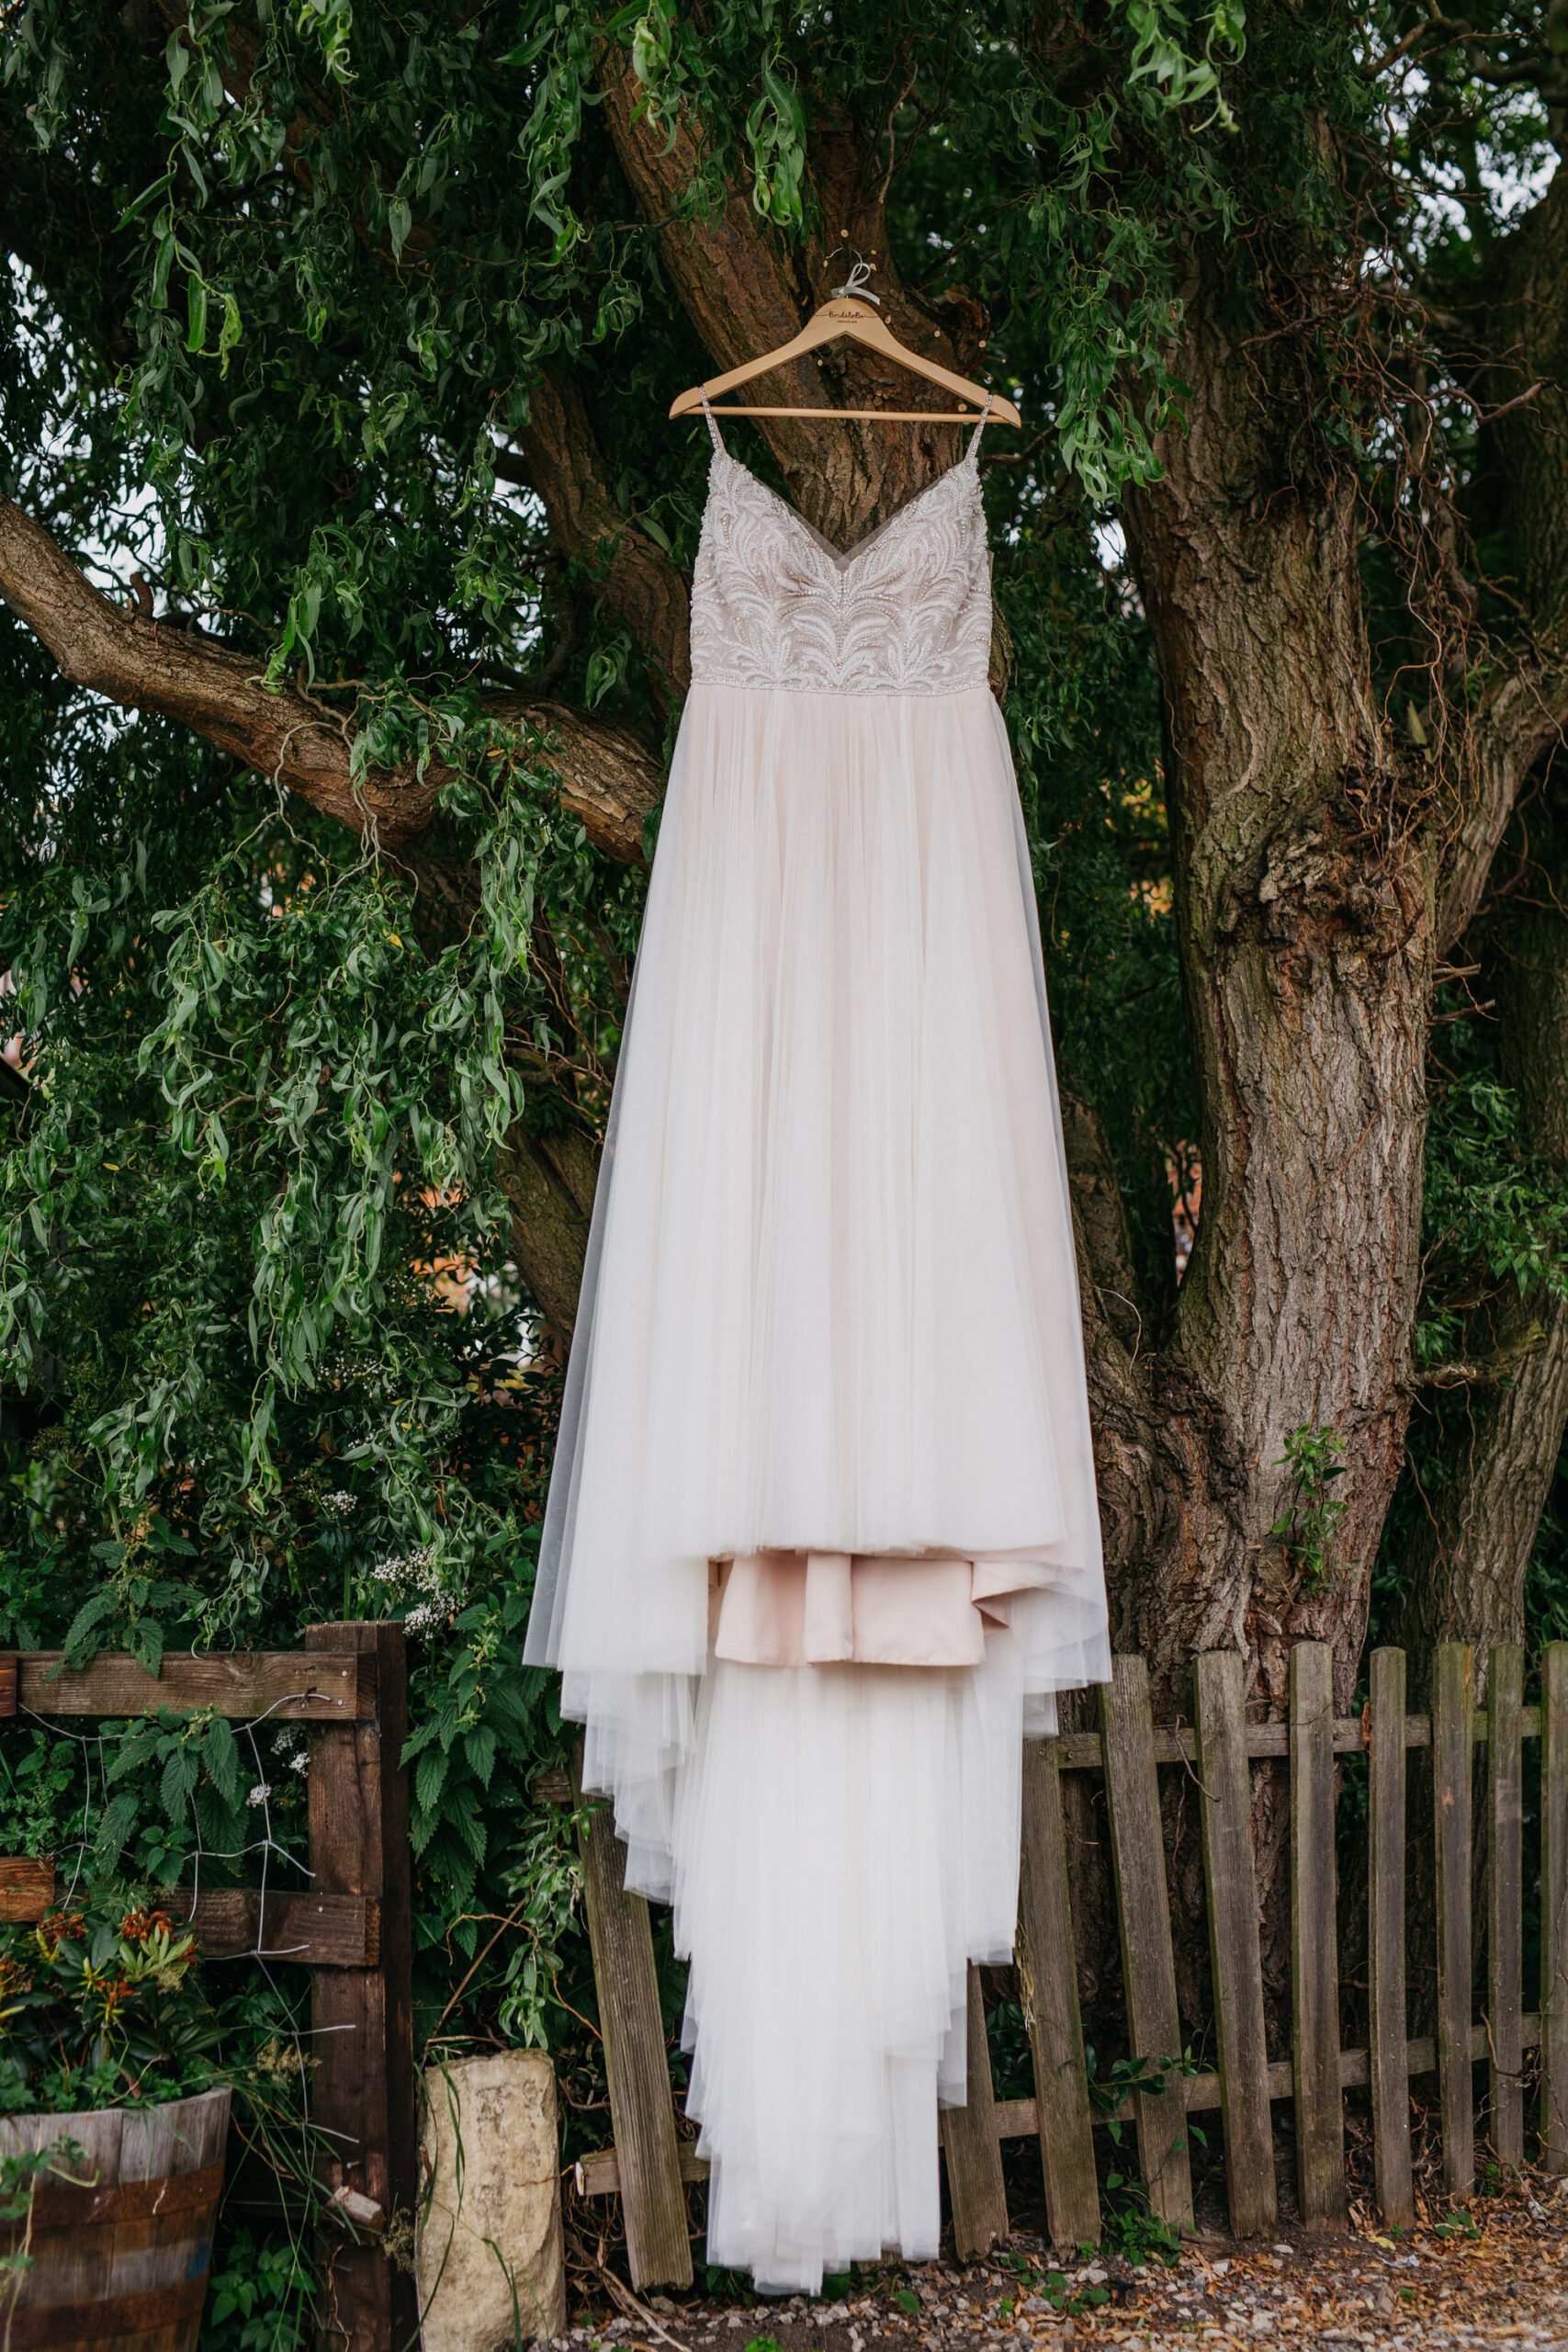 Yorkshire wedding photography of Alicia and Phil. She wears a white boho style dress and he's in a blue ckech suit. She has a full flower crown in delicate pinks, and they look happy. Image by John Hope Photography